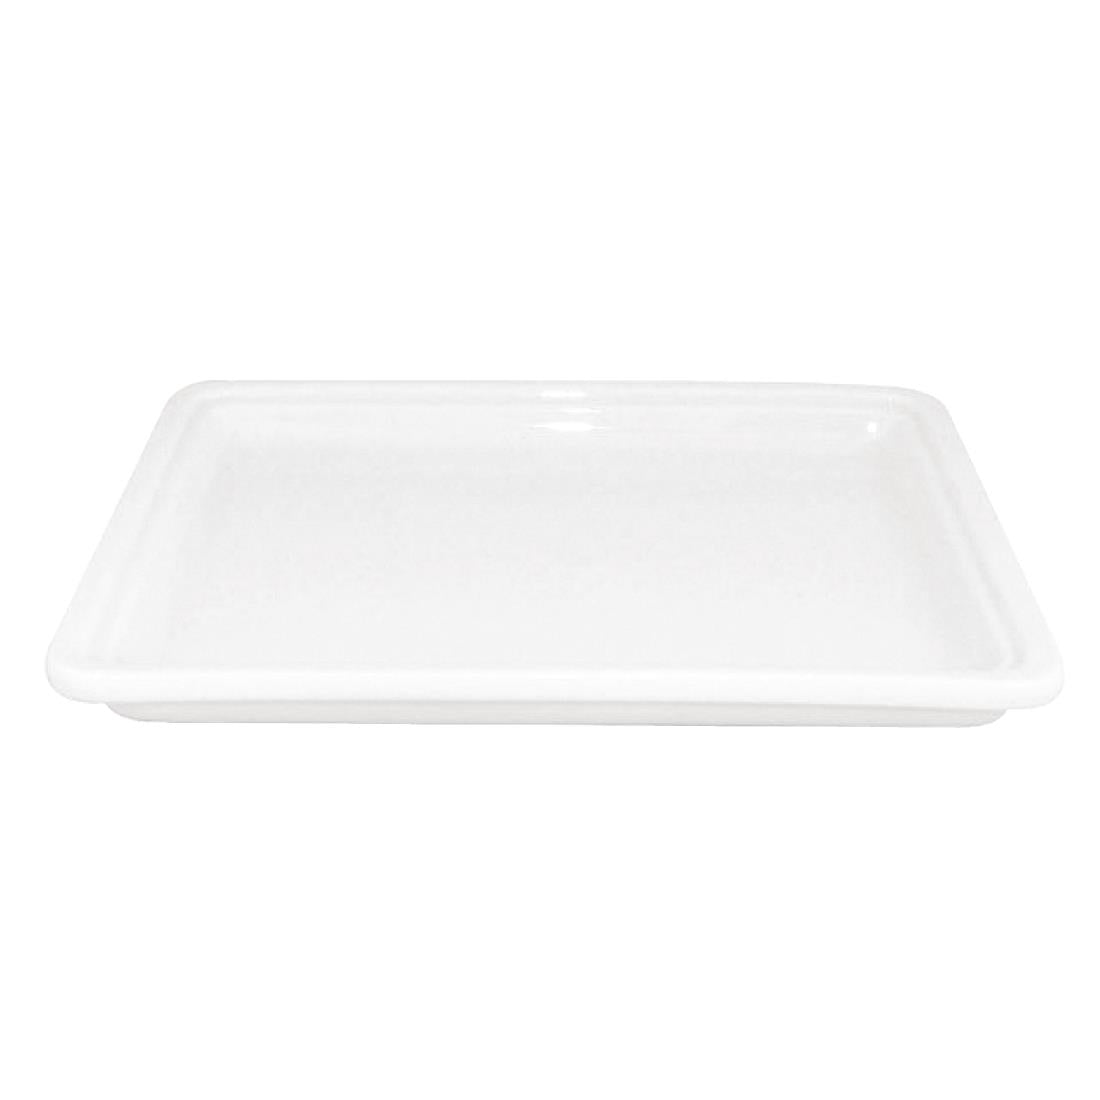 CD716 Olympia Whiteware 1/2 Half Size Gastronorm 30mm